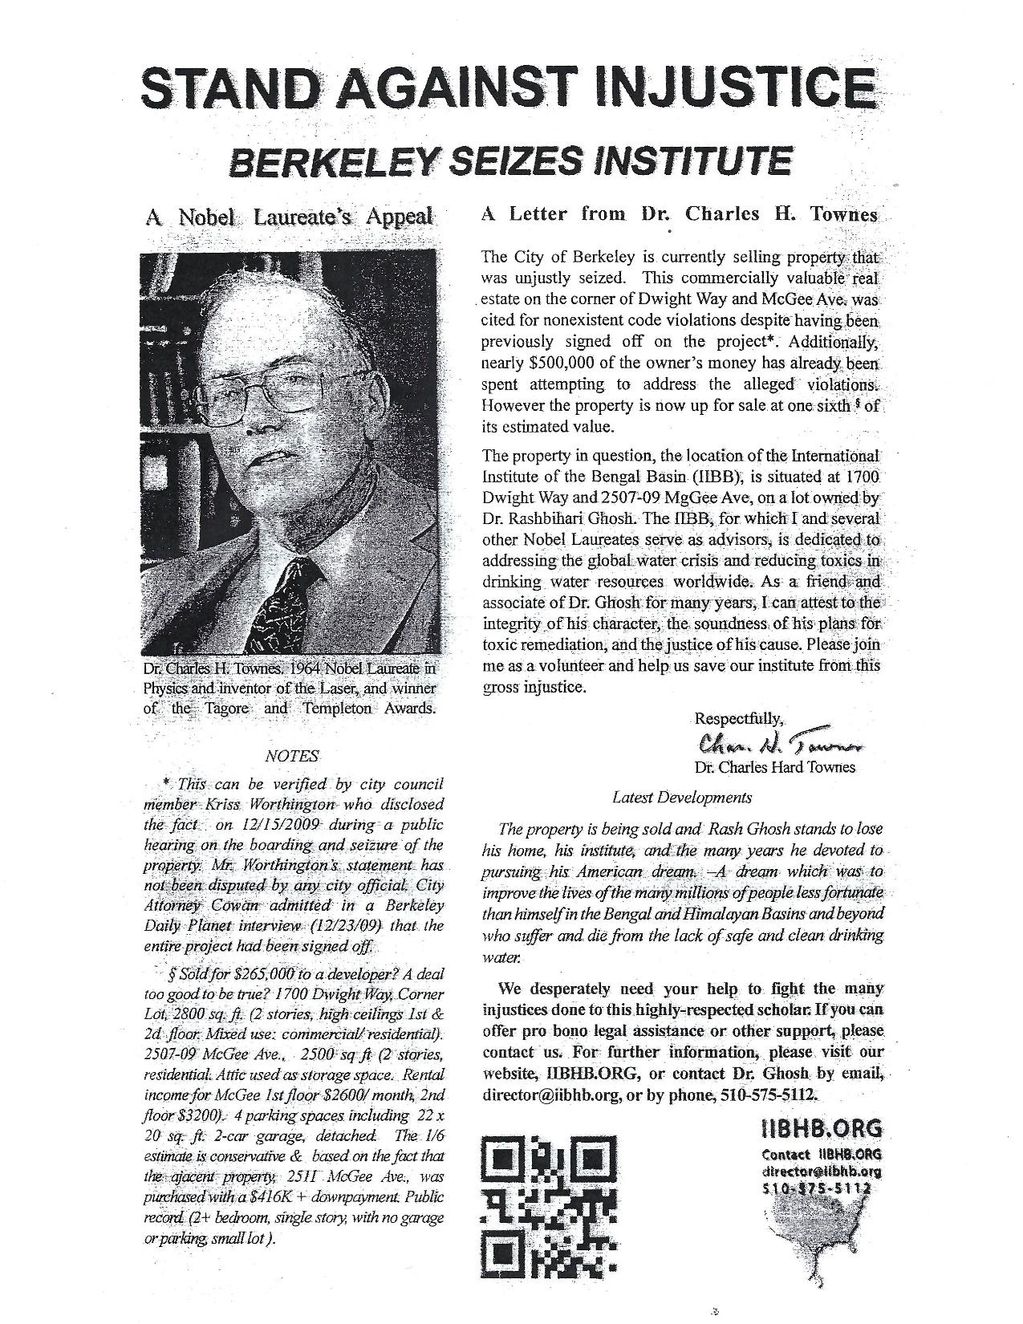 An article featuring the letter of Dr. Charles H. Townes